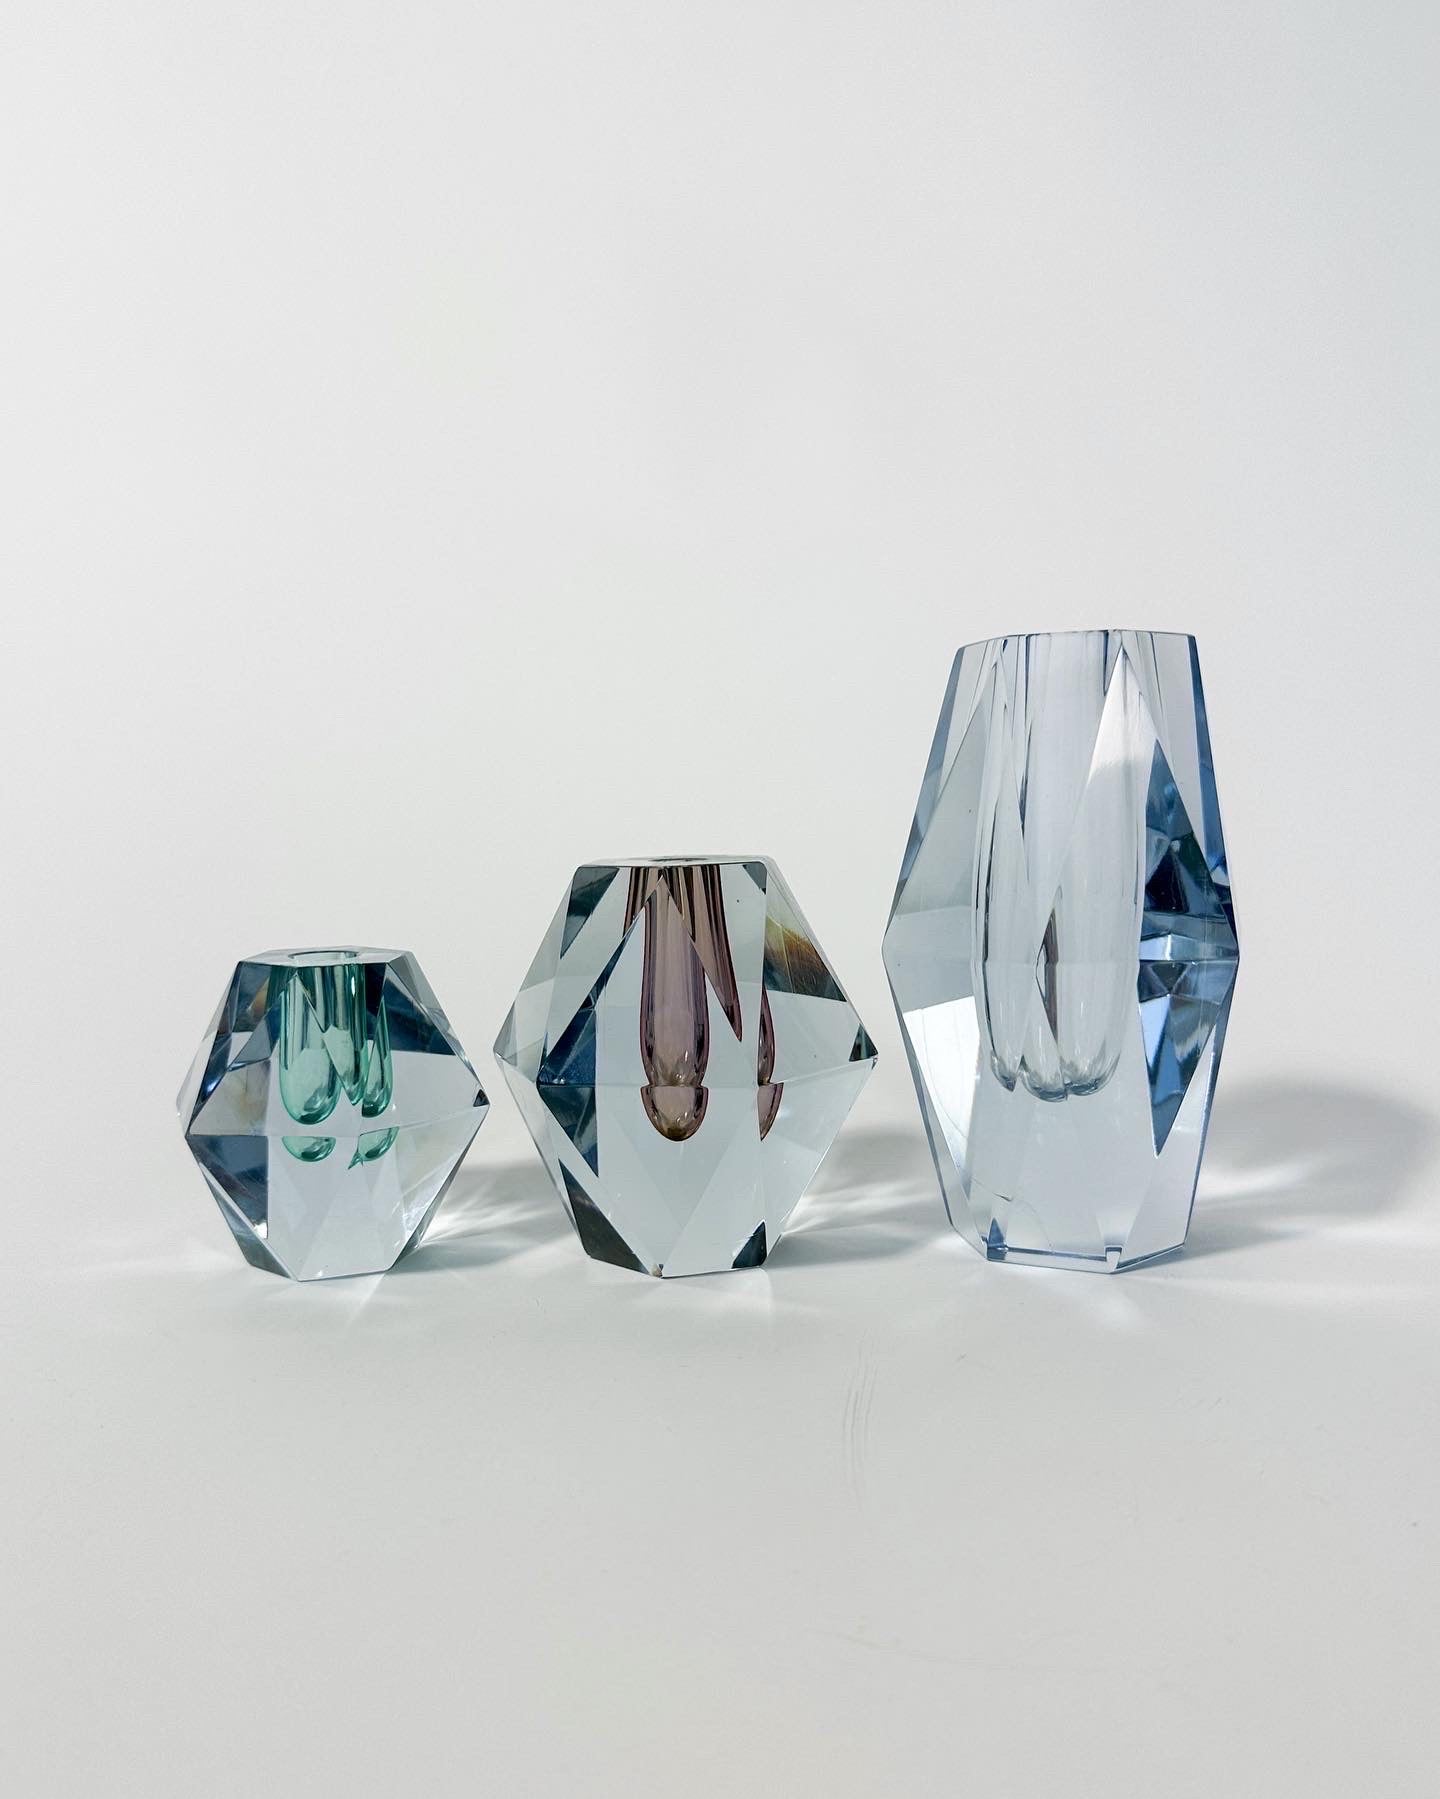 Set of three Asta Strömberg diamond crystal vases for Strömbergshyttan, Sweden, 1960s.

All in very good condition with minimal wear, all signed underneath.

Model B950, clear glass, height: 16.5 cm

Model B970, amethyst glass, height: 10 cm

Model